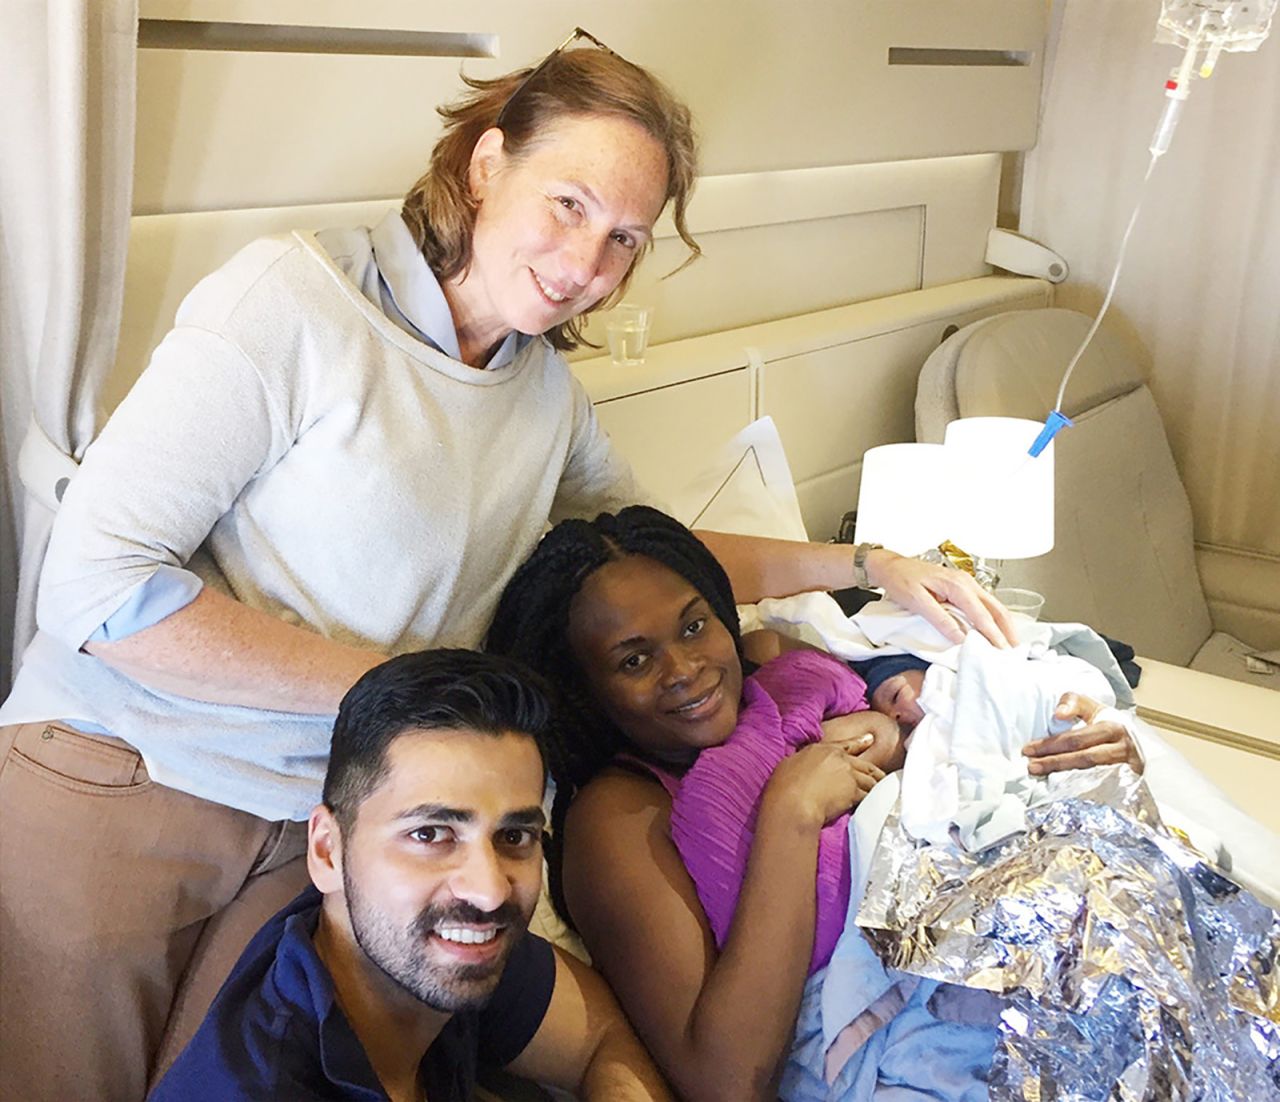 Dr. Hemal was seated next to French pediatrician, Dr. Susan Shepherd, and together they delivered a healthy baby boy.